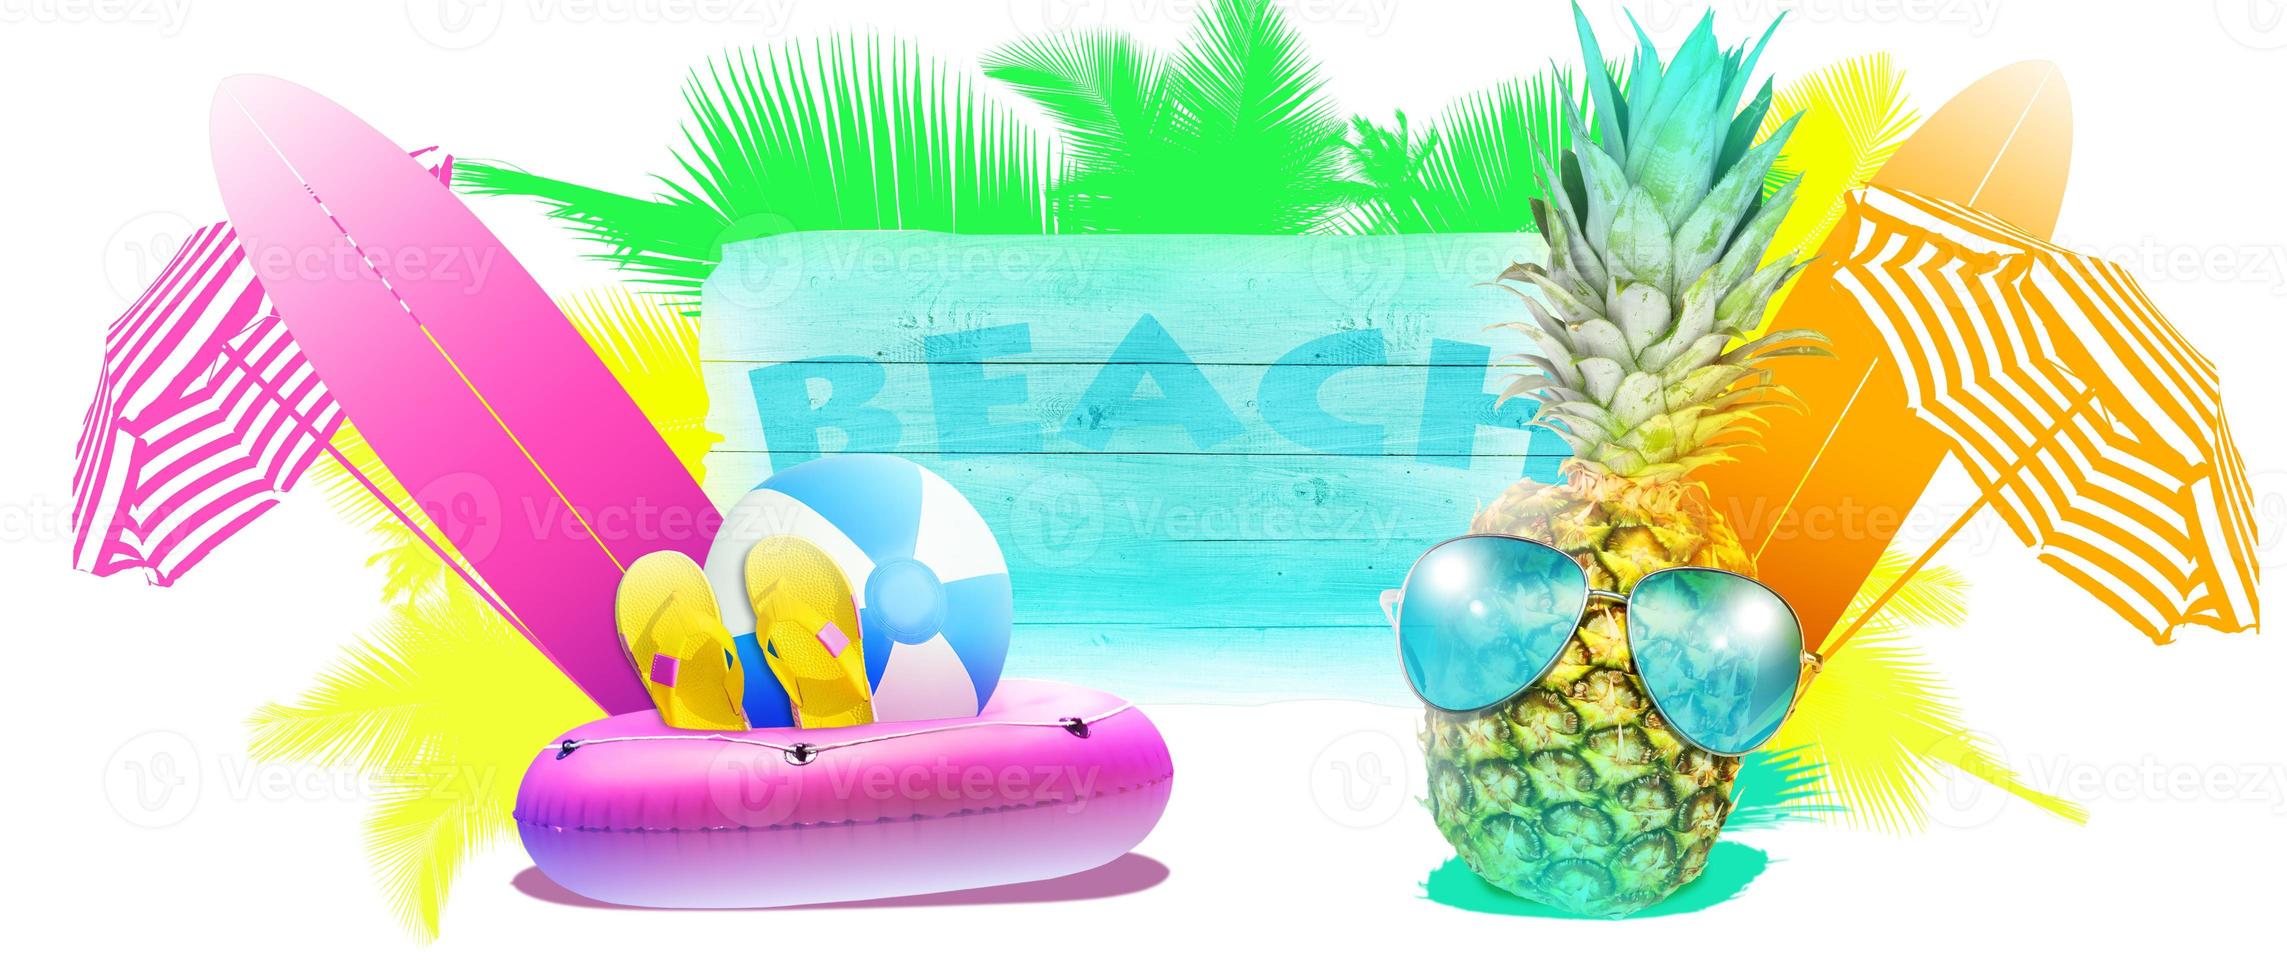 Creative pineapple with sunglasses on summer background. photo